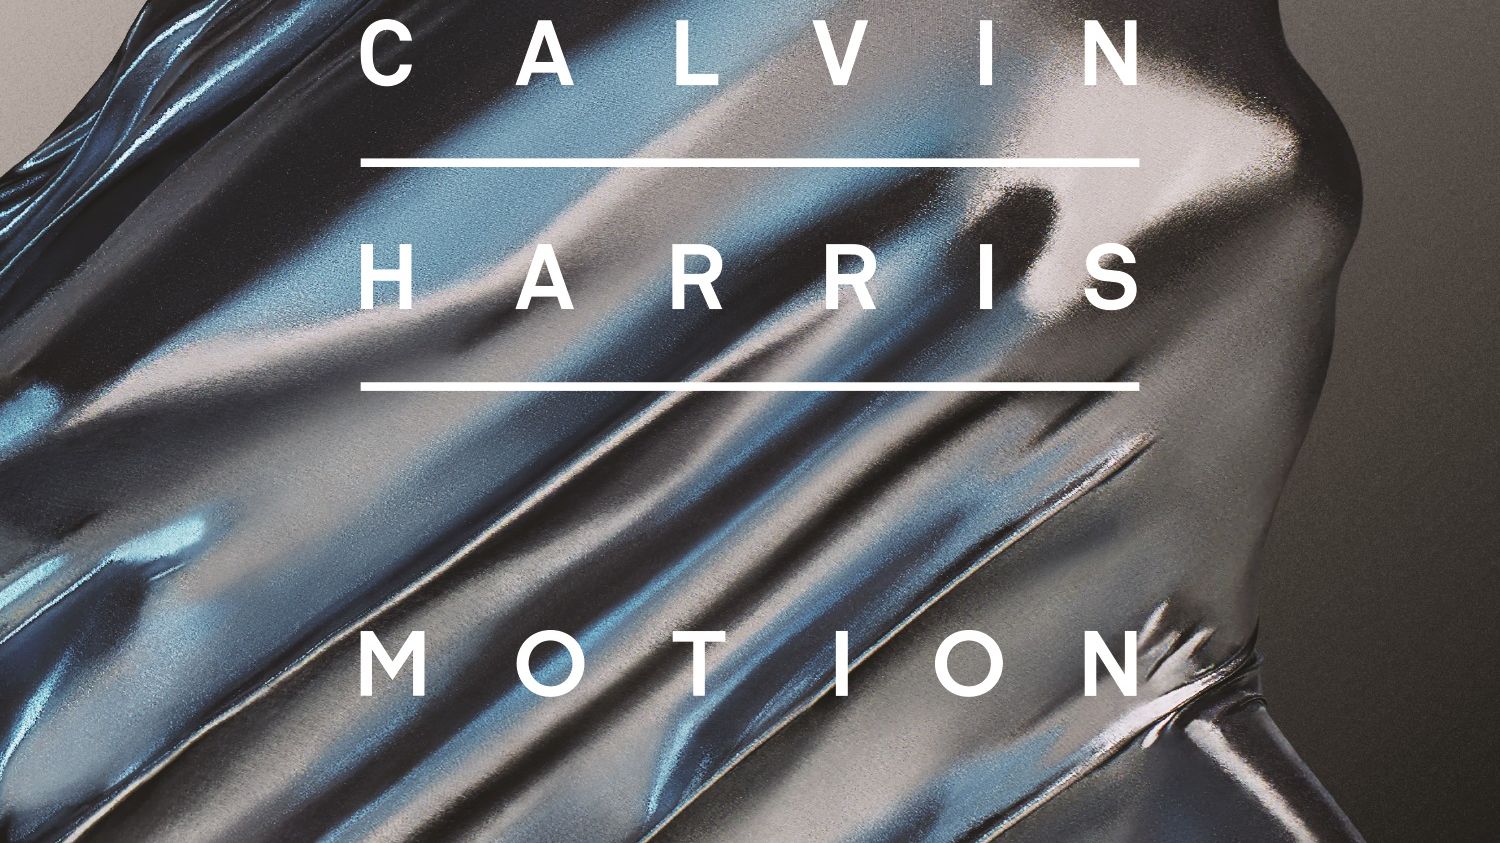 Calvin Harris releases his new album “Motion” on October 31st